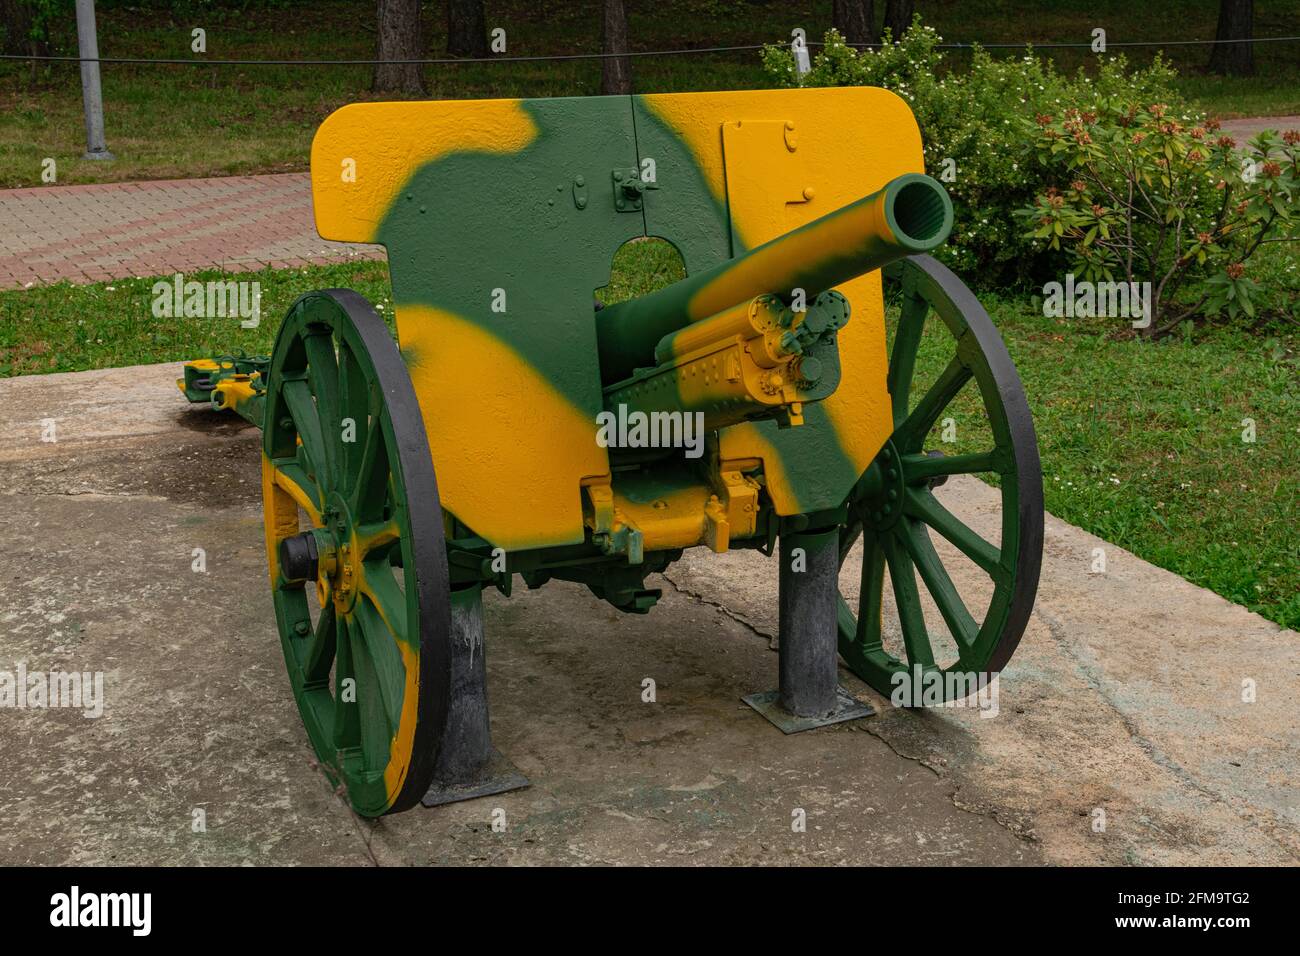 Moscow/Russia; June 30 2019: Type 94 75mm mountain gun,  Imperial Japanese army, displayed in russian Great Patriotic War Museum Stock Photo